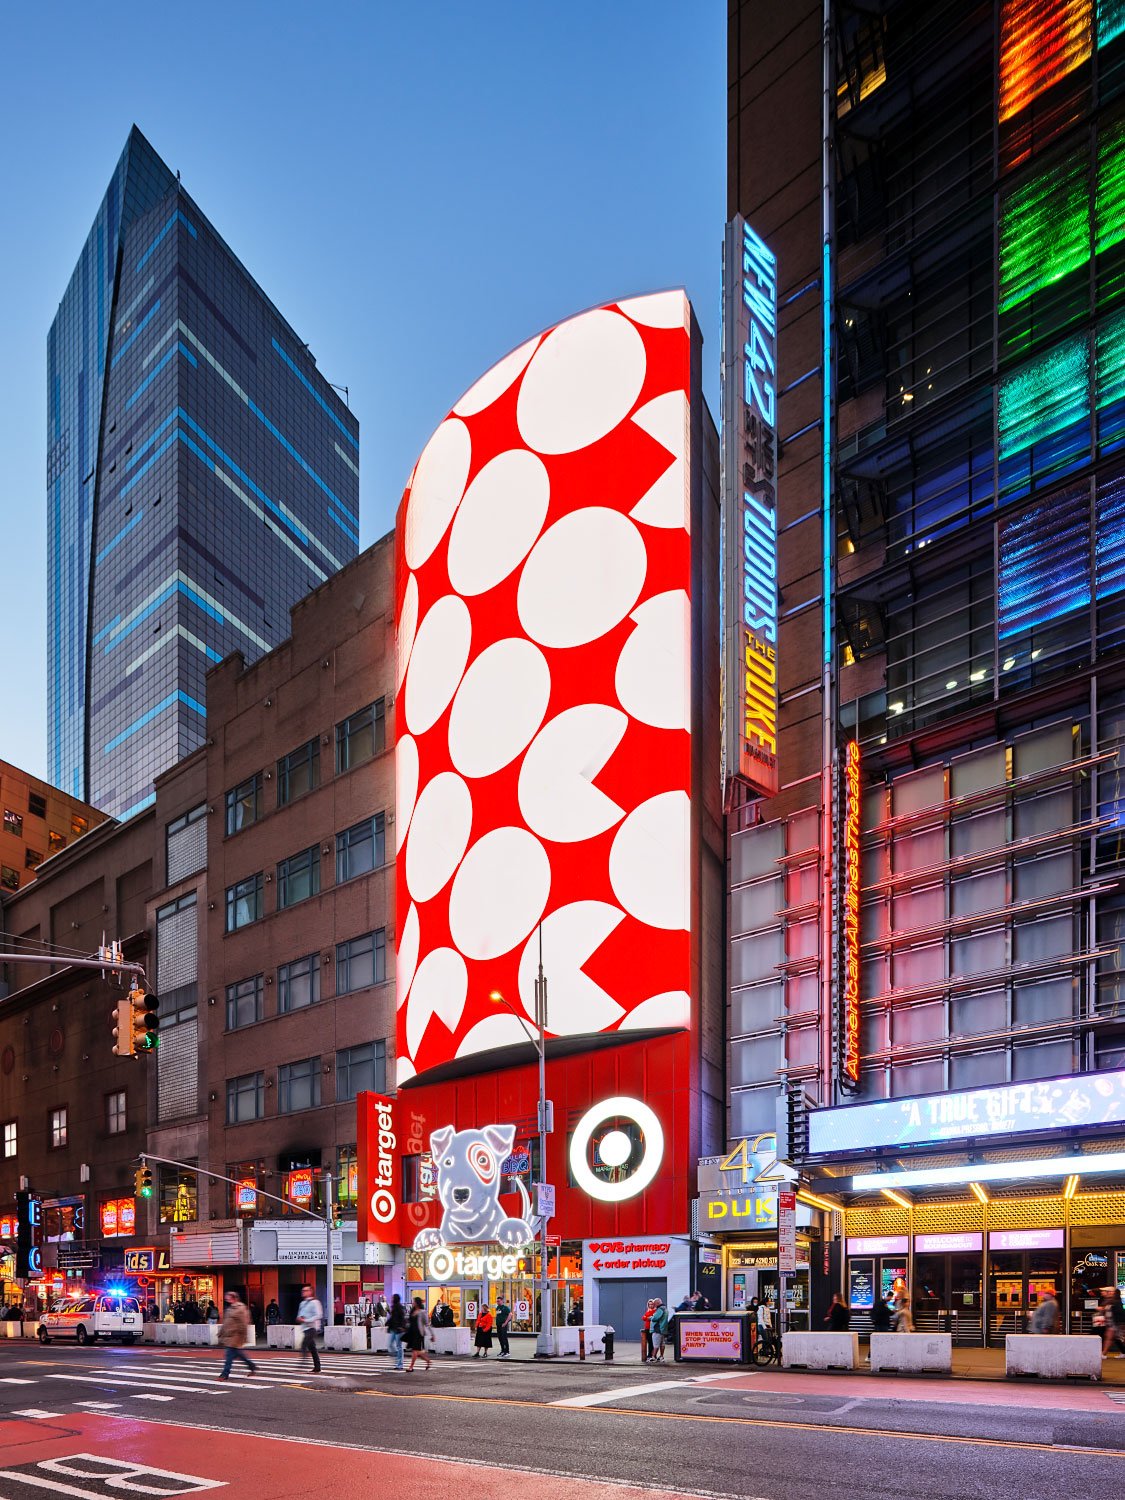  Target Times Square Target New York City, NY  